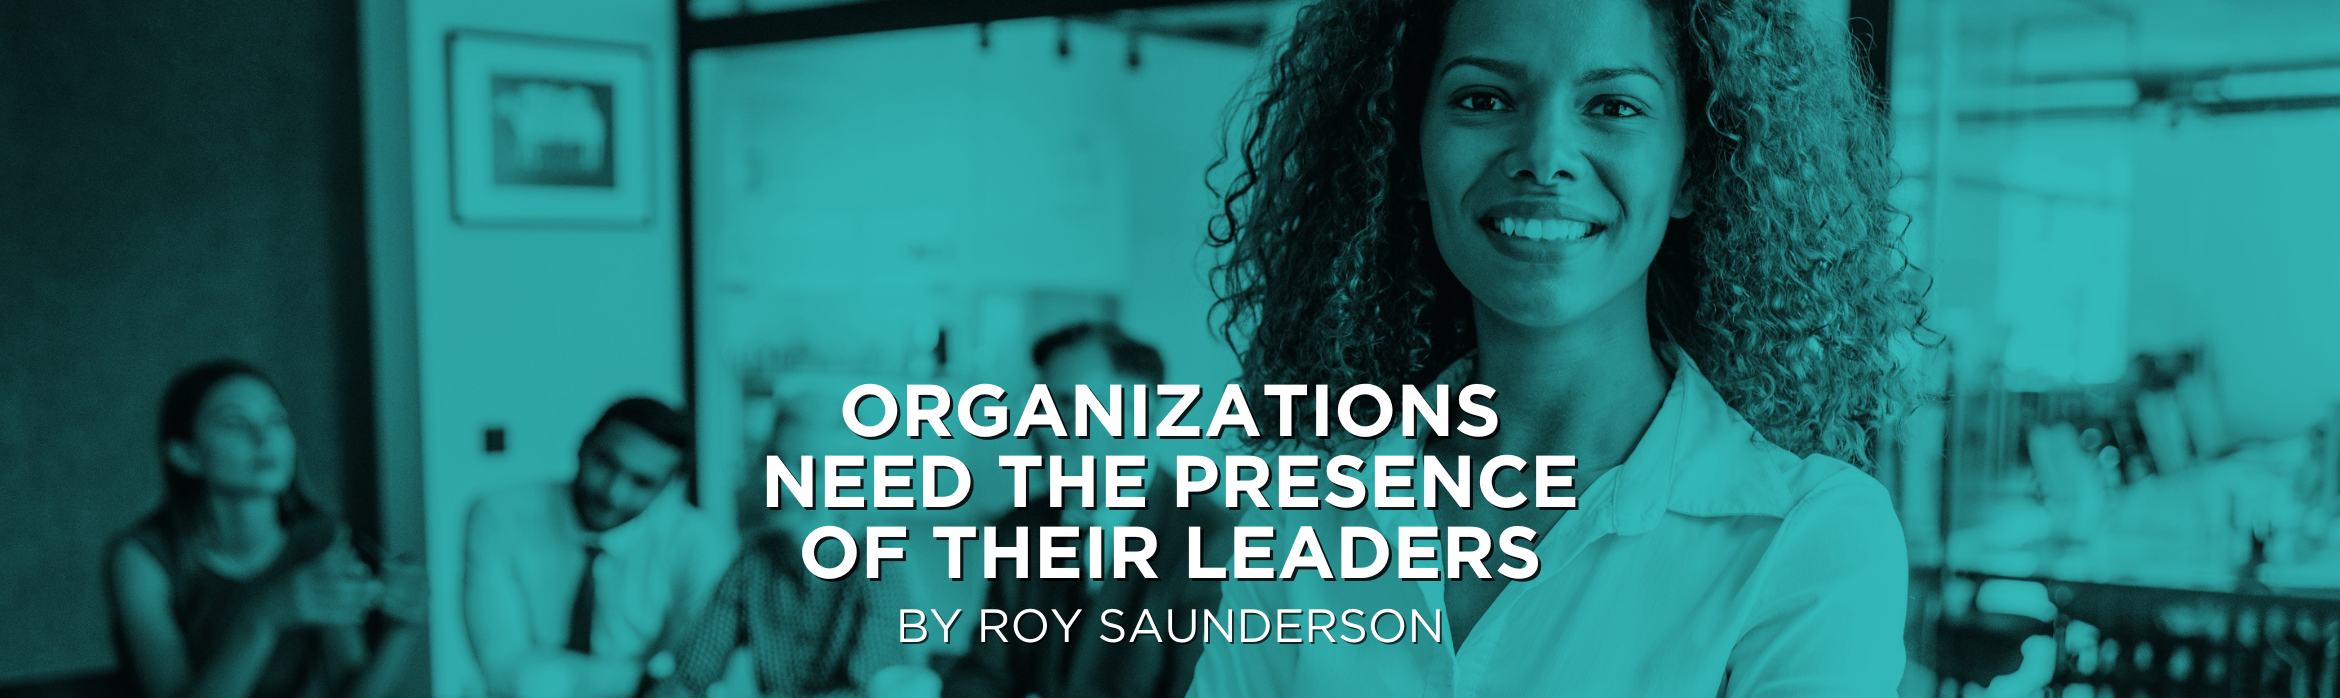 Organizations Need the Presence of their Leaders